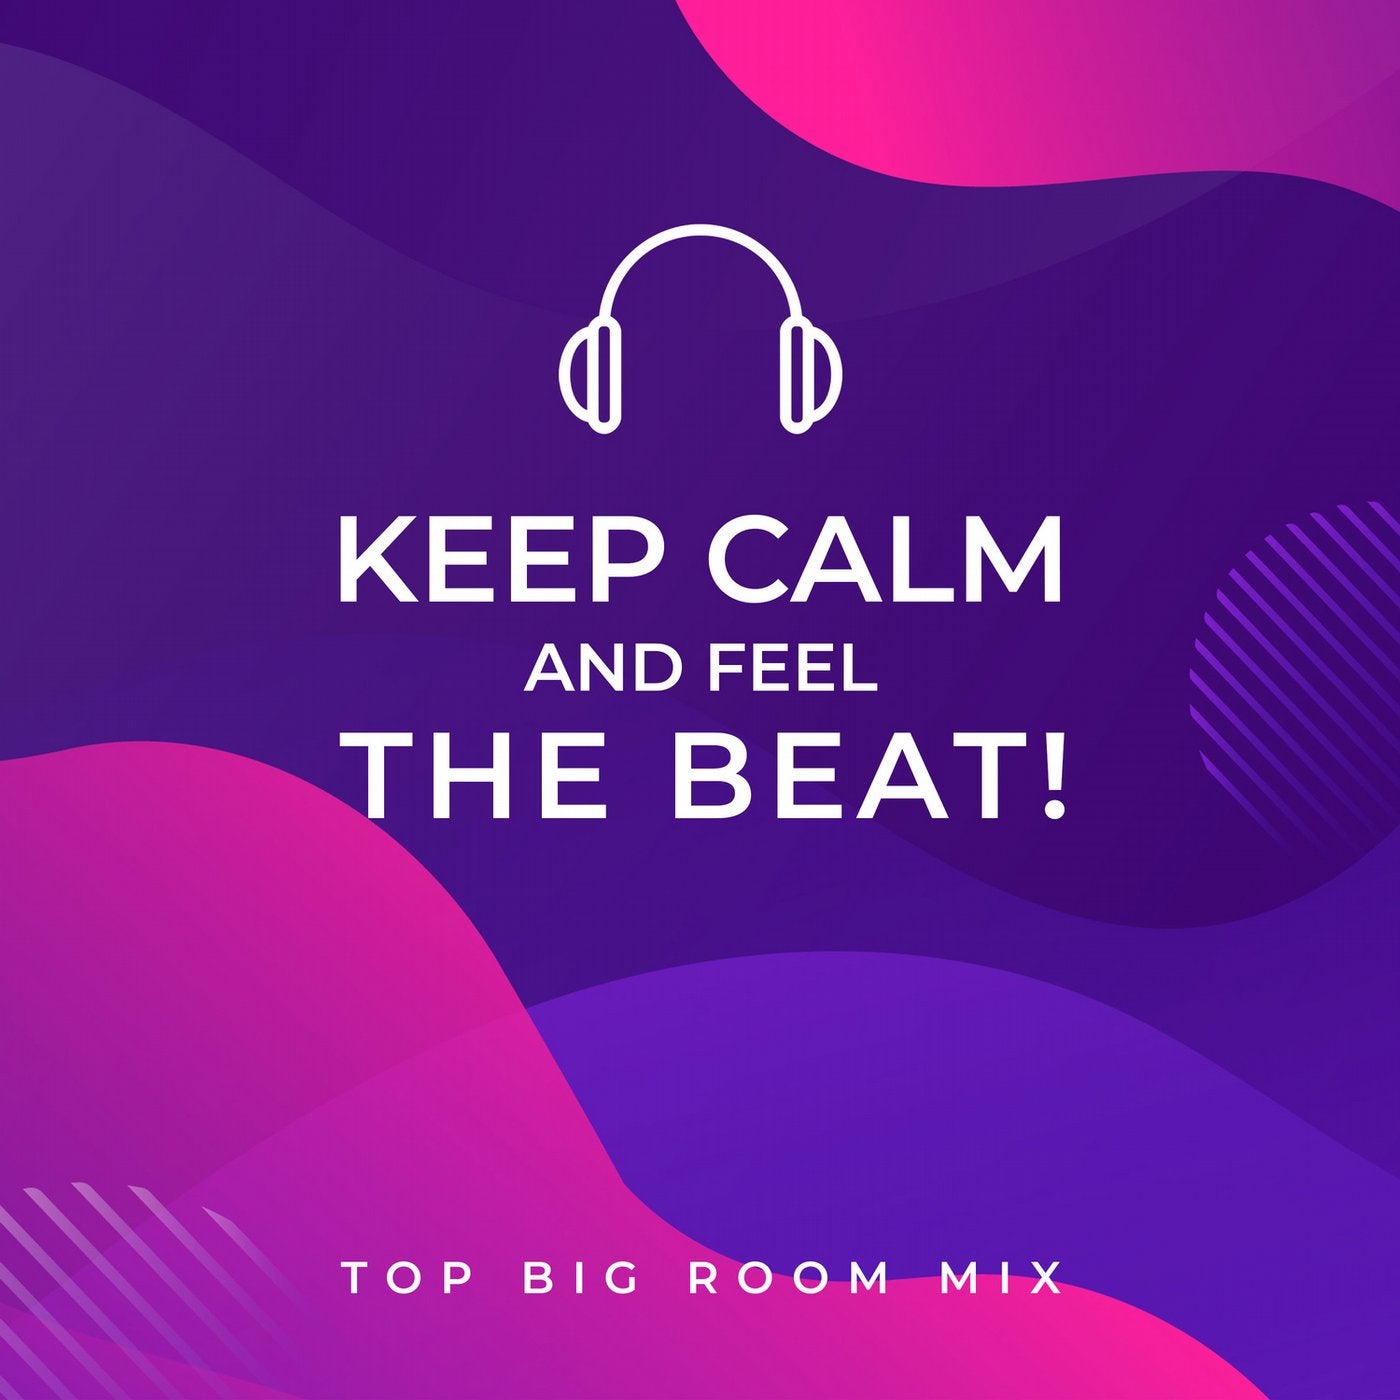 Keep Calm and Feel the Beat! Top Big Room Mix